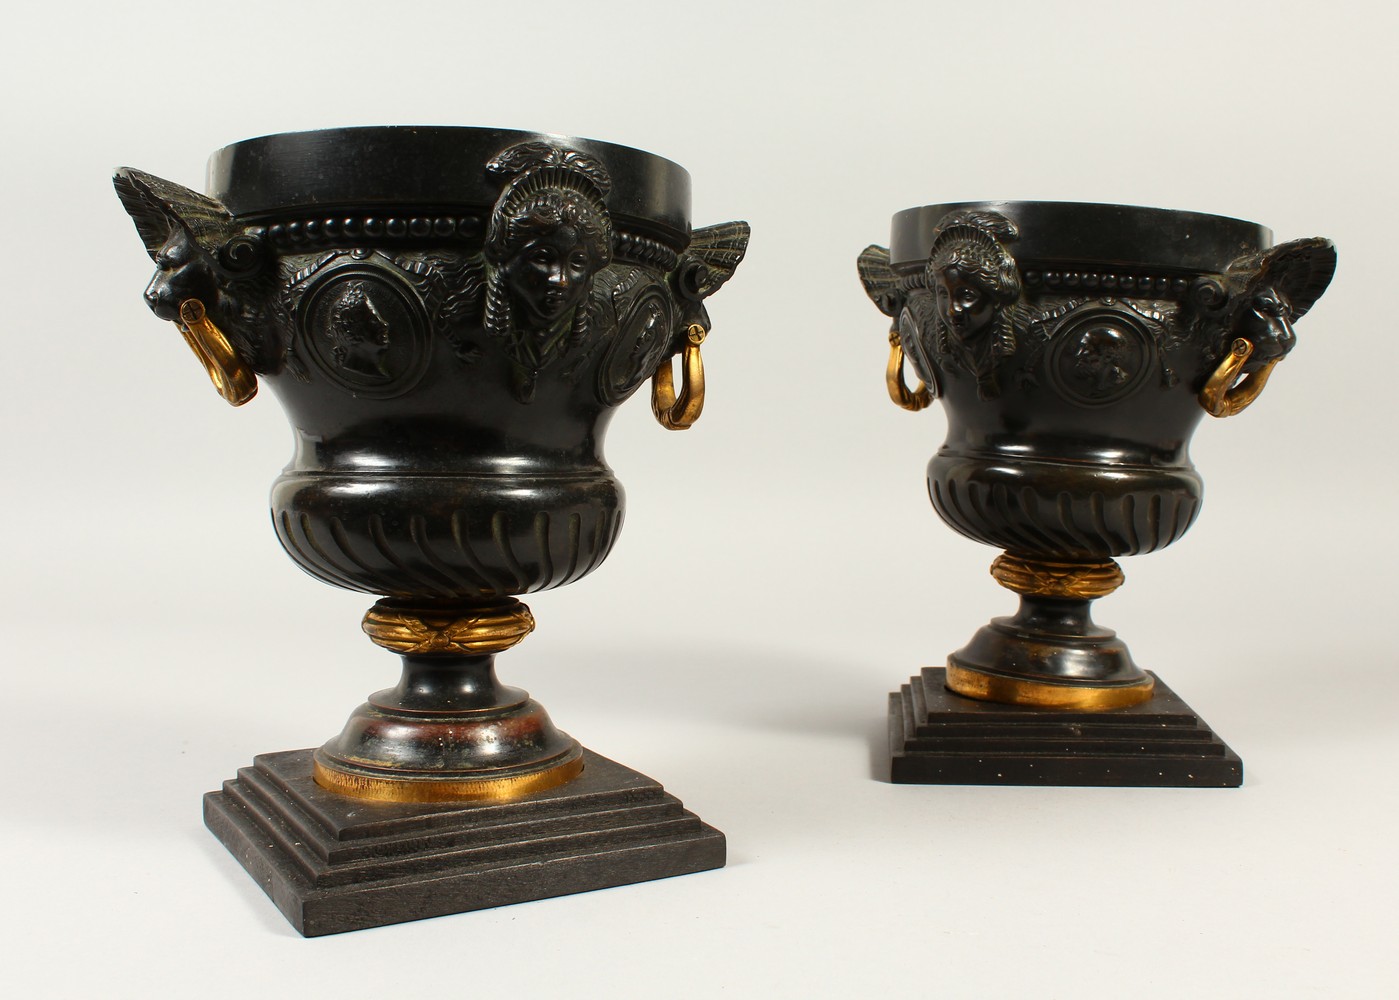 A PAIR OF 19TH CENTURY CAST BRONZE URNS, with lions mask and gilded handles, the body decorated with